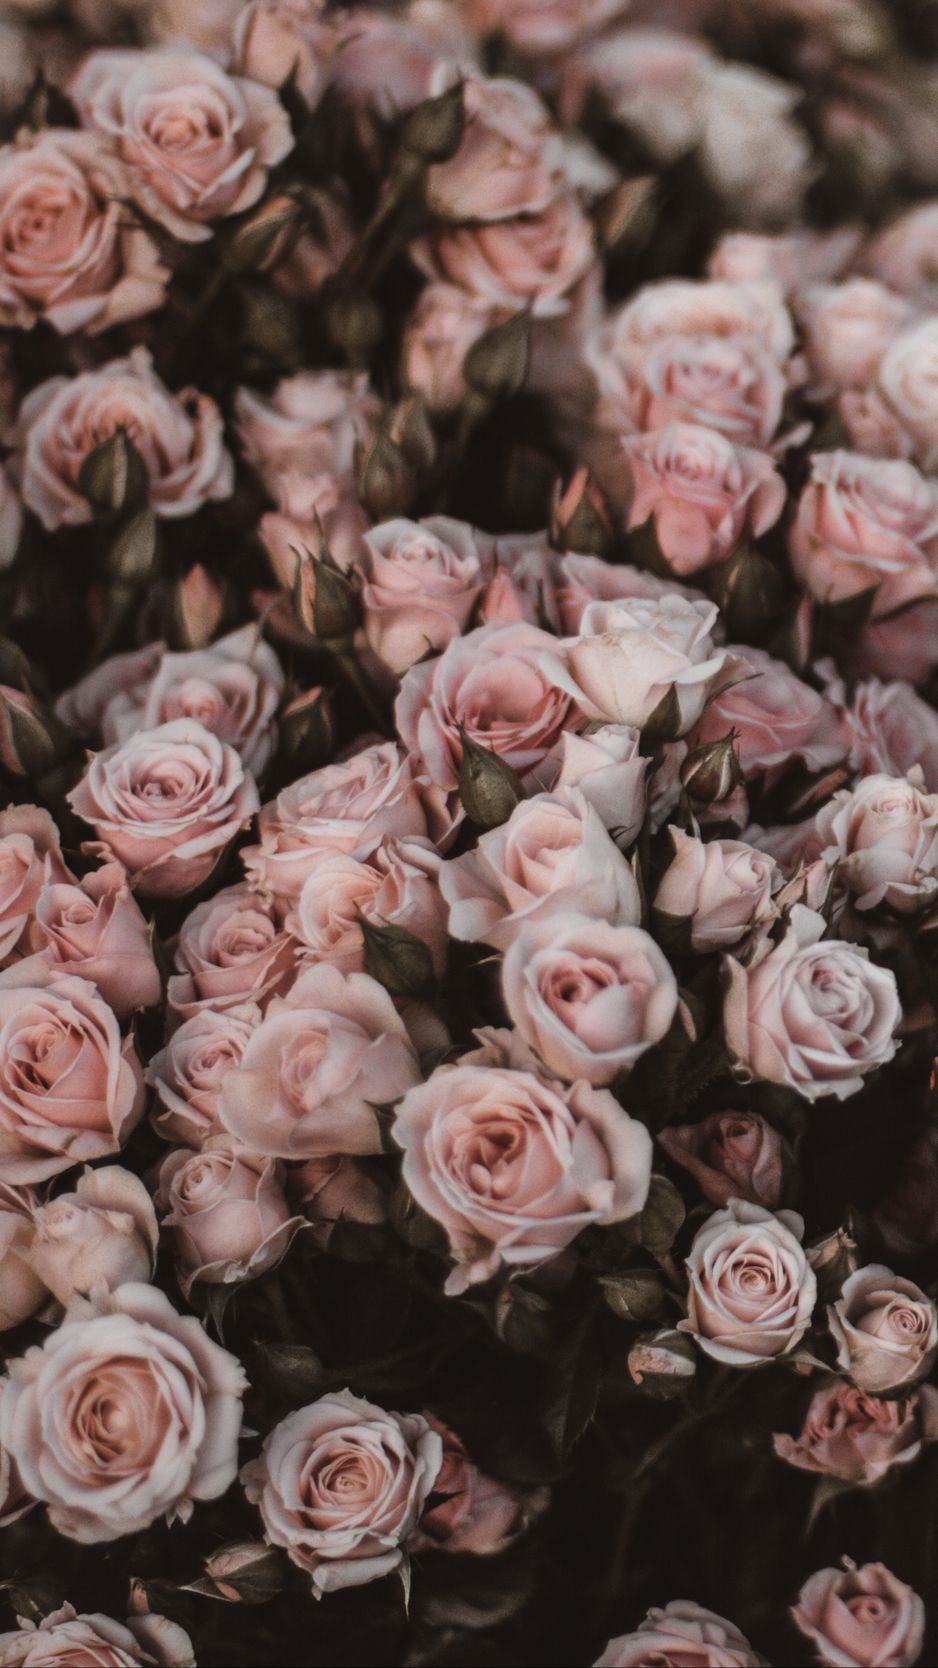 Download wallpaper 938x1668 roses, bouquet, flowers, light pink, romance  iphone 8/7/6s/6 for parallax hd background